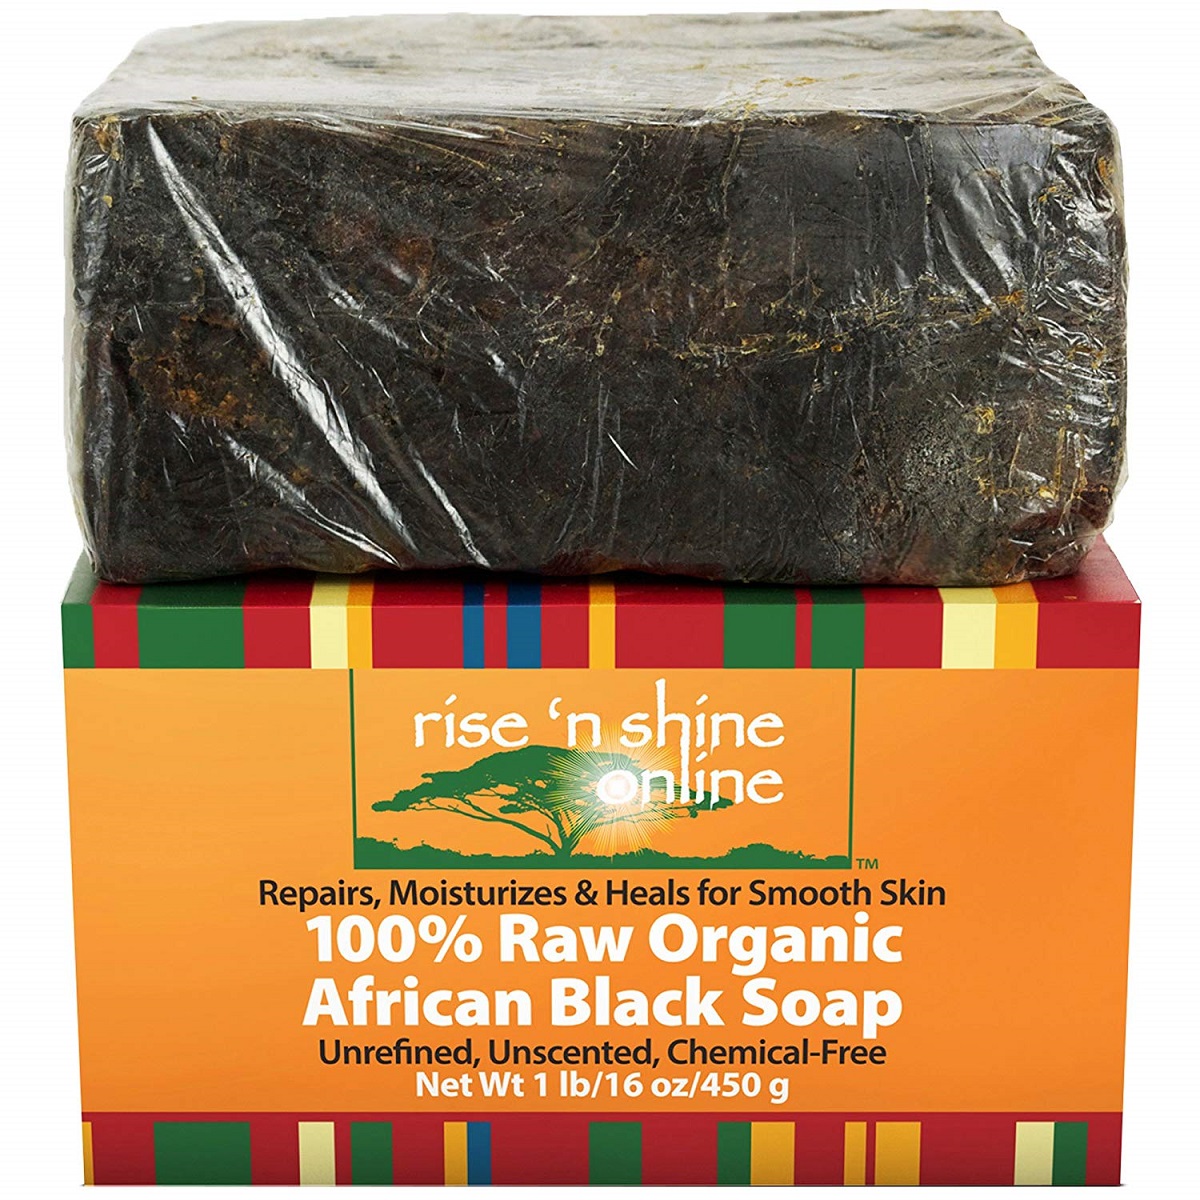 raw African black soap